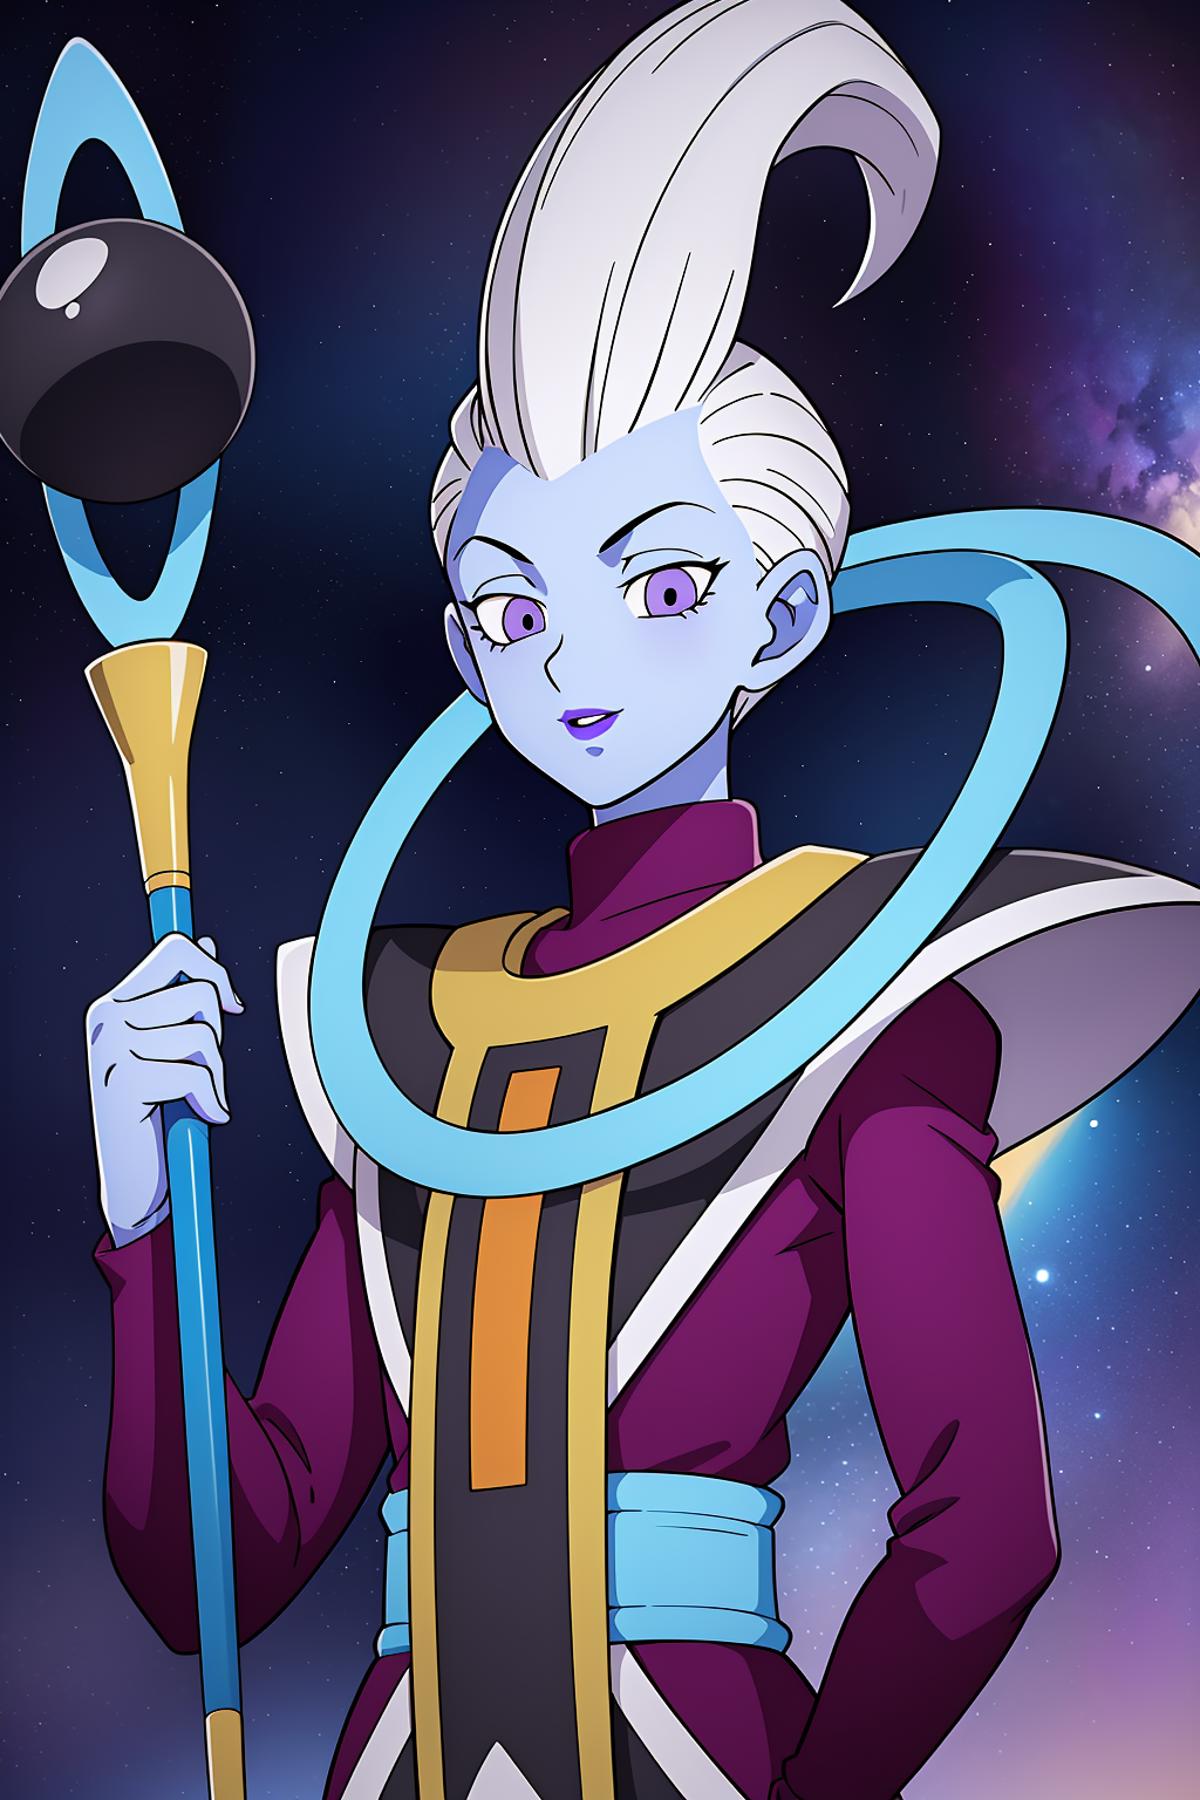 Whis image by infamous__fish